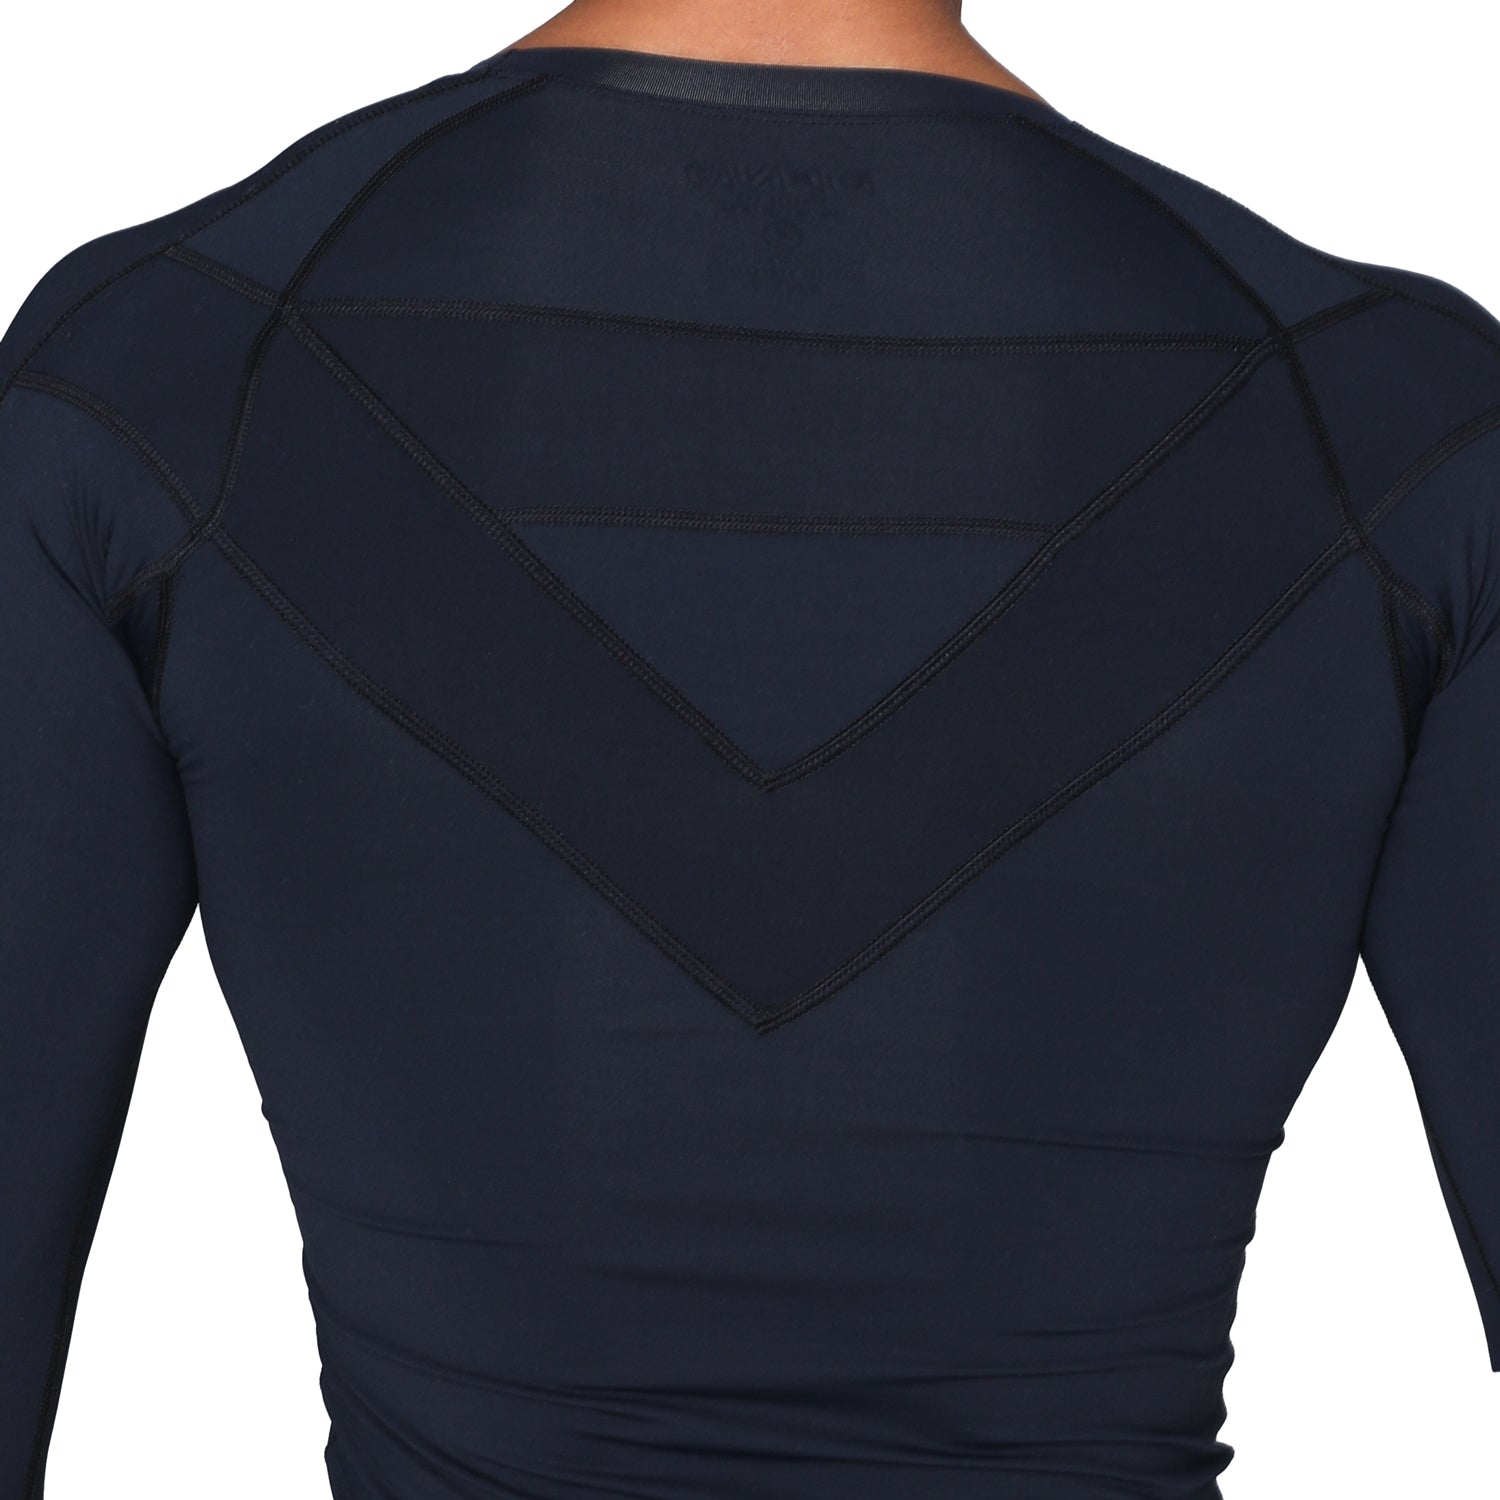 2XU Refresh Recovery Long Sleeve Compression Top - Women's